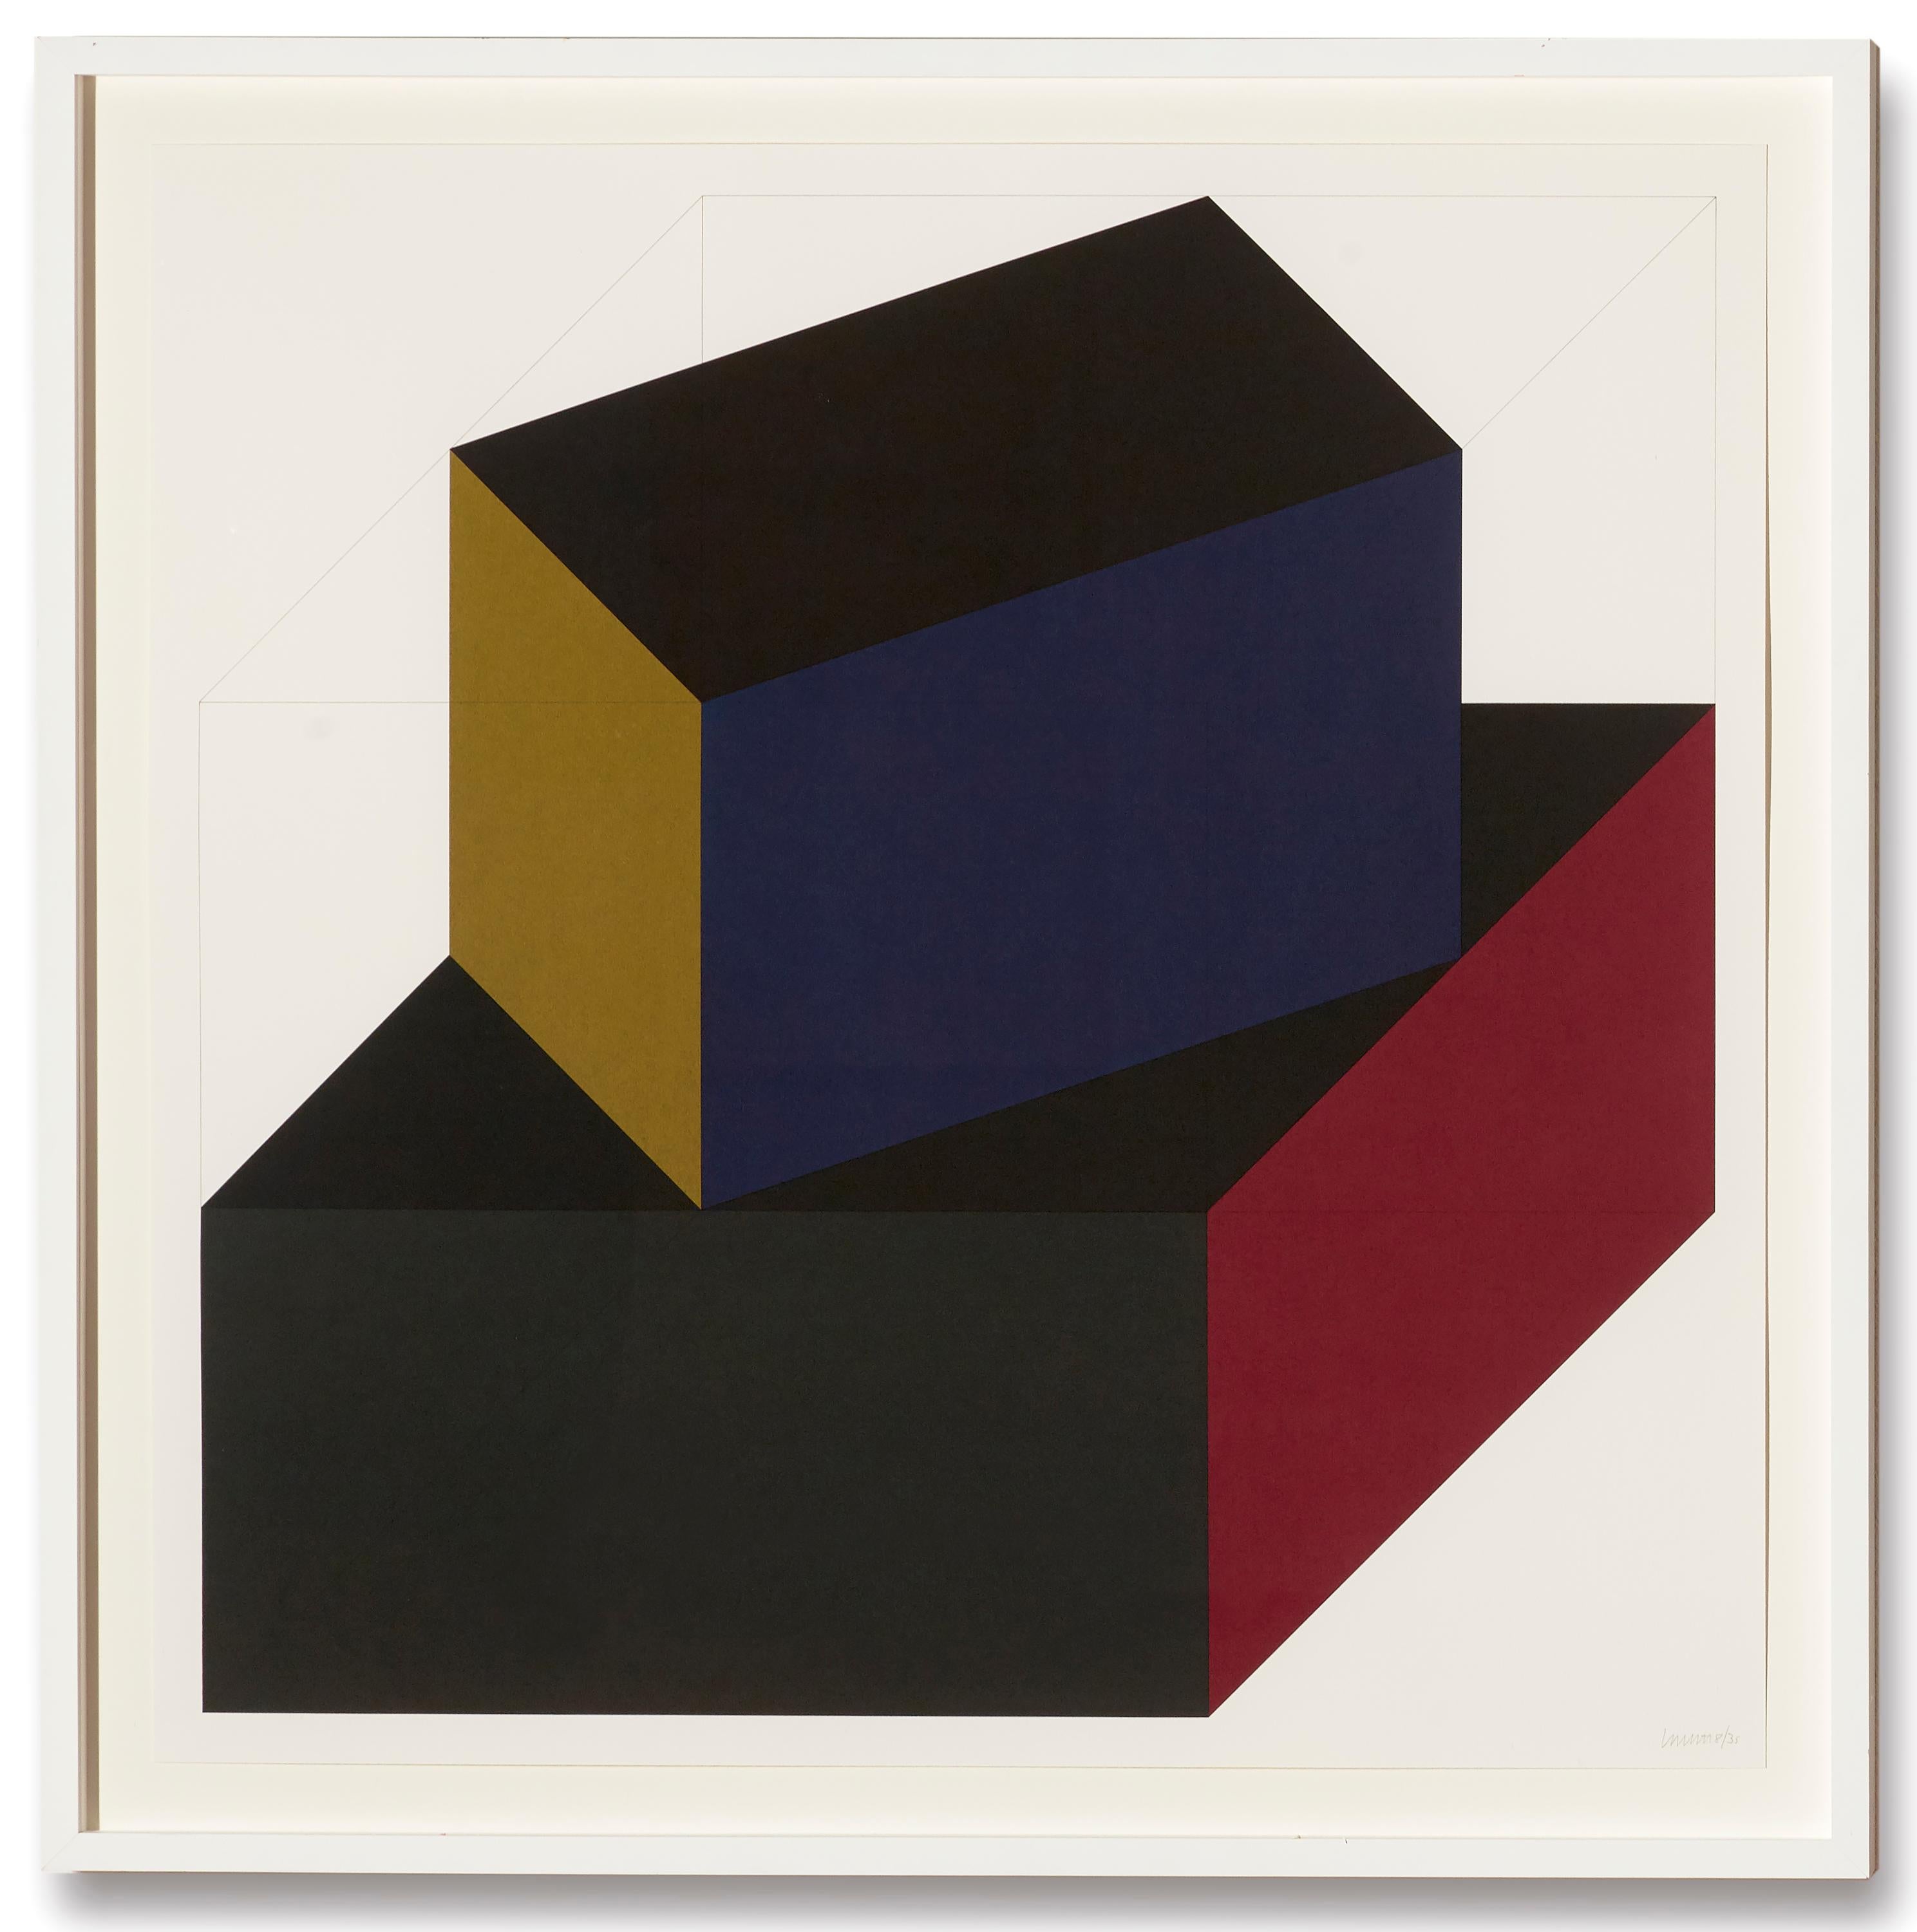 Forms Derived from a Cube (Colors Superimposed), Plate #06 - Print by Sol LeWitt